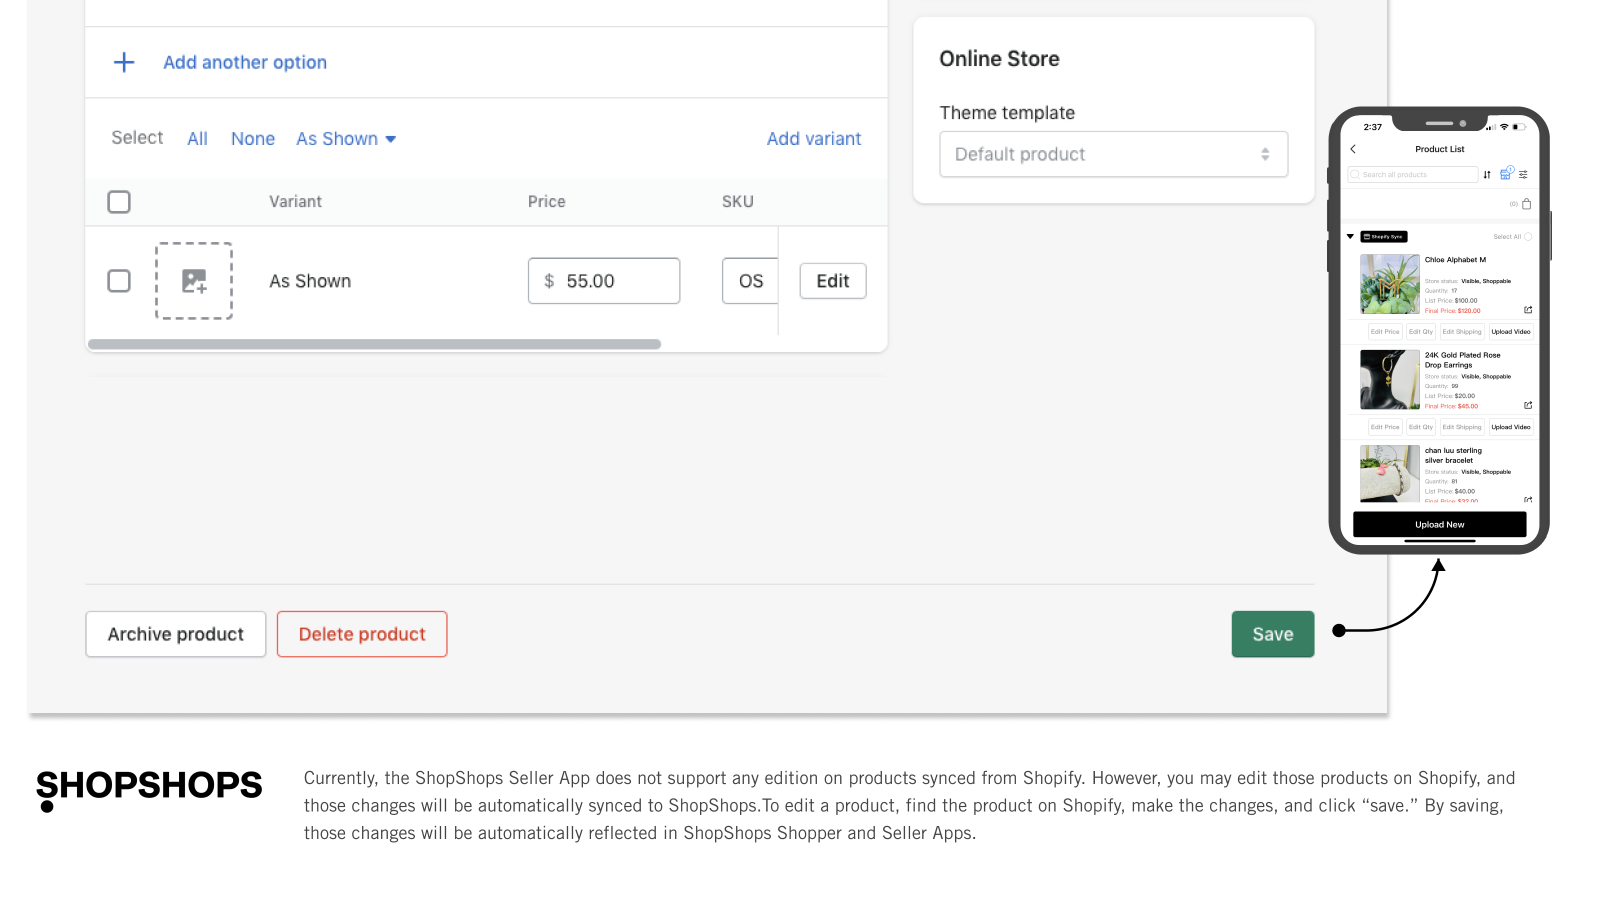 Sync product details and status between ShopShops & Shopify.